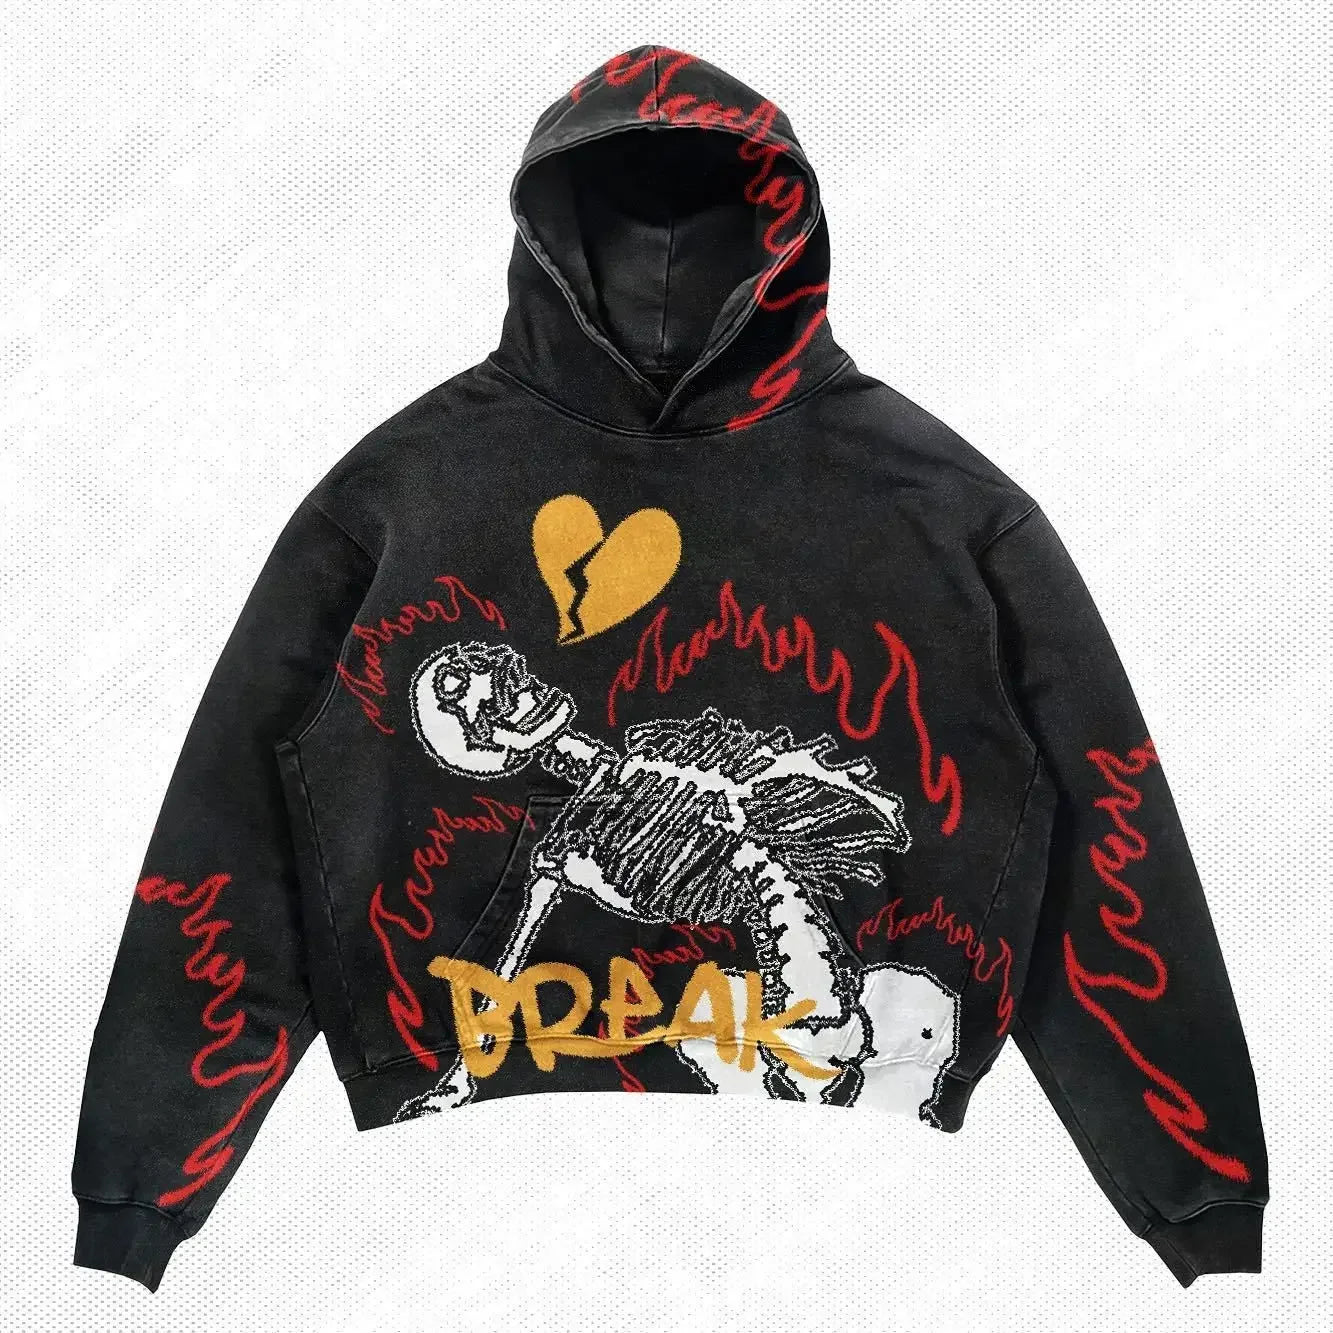 A Maramalive™ Explosions Printed Skull Y2K Retro Hooded Sweater Coat Street Style Gothic Casual Fashion Hooded Sweater Men's Female with a skeleton graphic, red flame accents, a broken heart symbol, and the word "BREAK" in yellow text. This piece of men's clothing captures the essence of punk style perfectly.